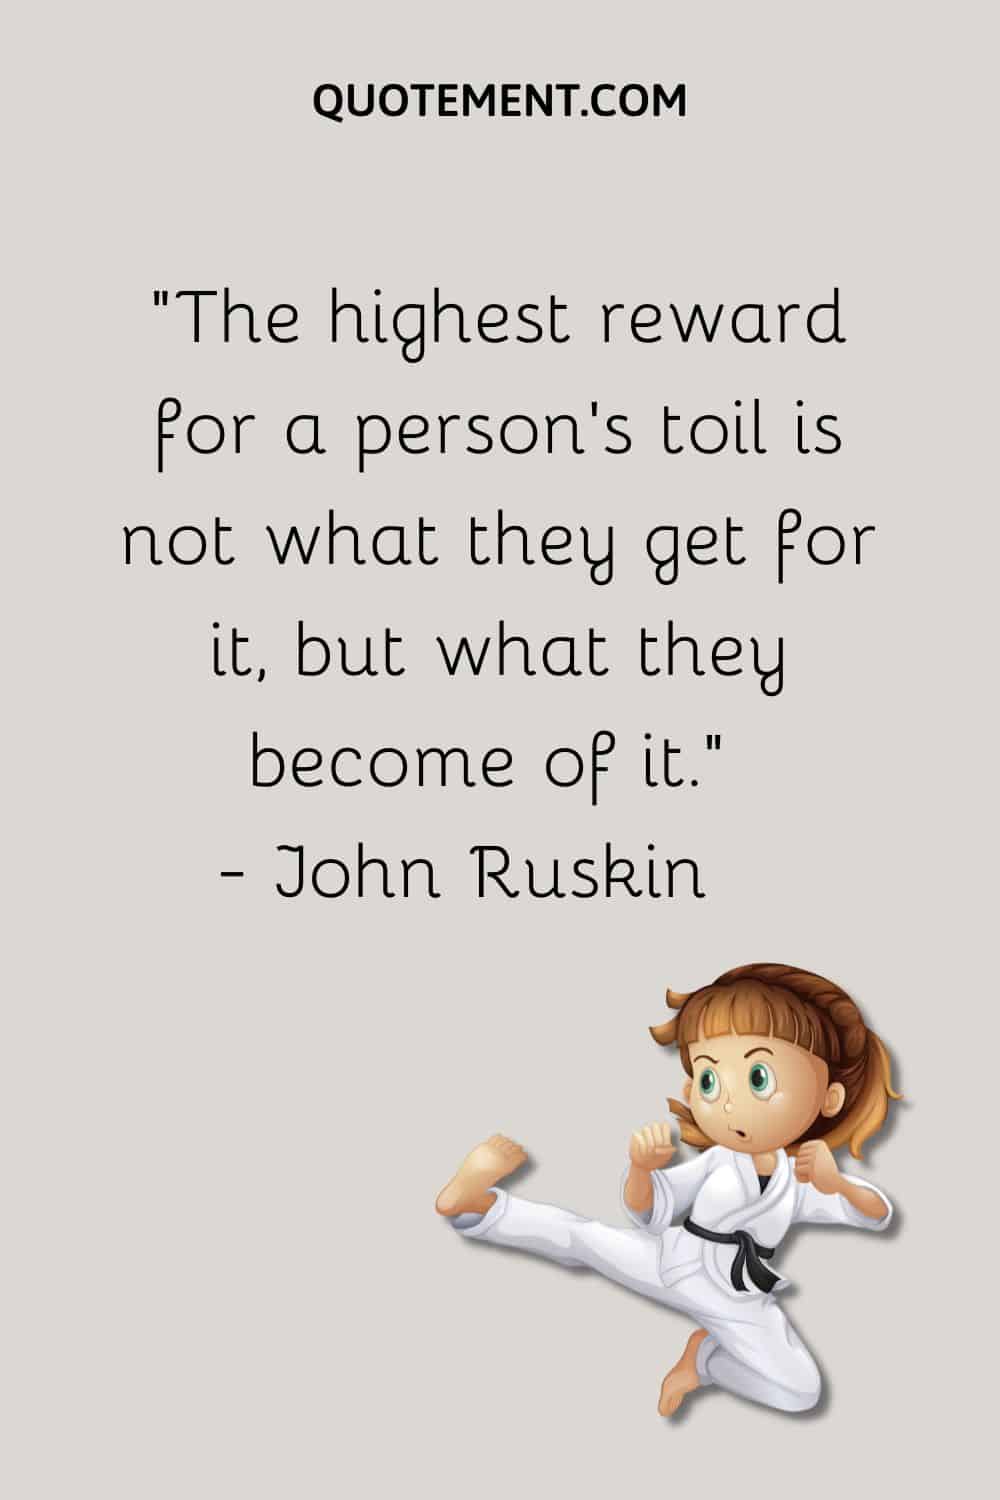 The highest reward for a person’s toil is not what they get for it, but what they become of it.